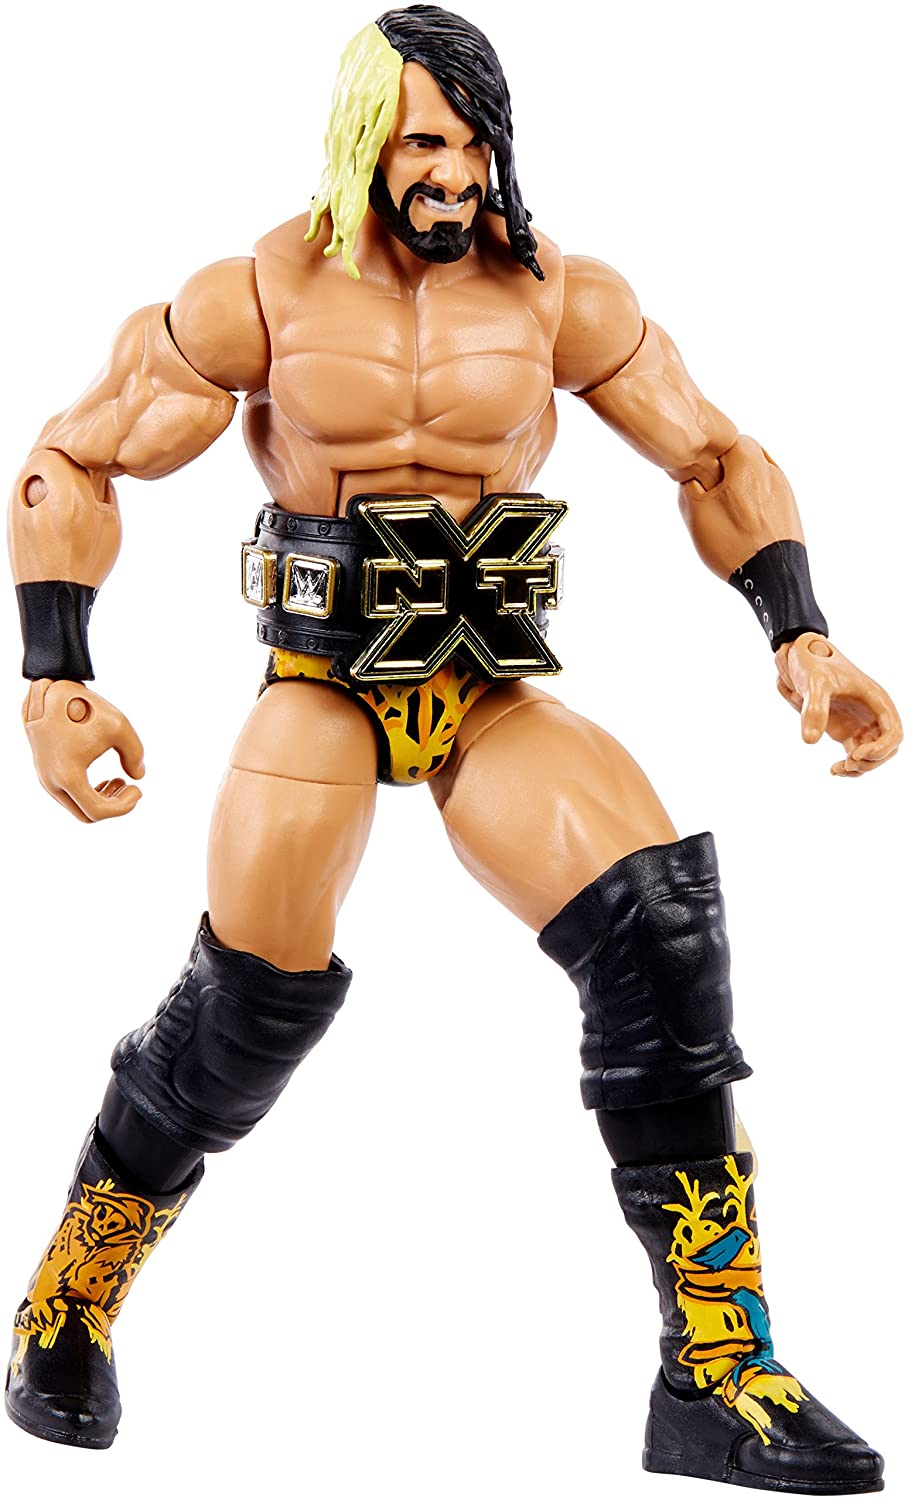 2017 WWE Mattel Elite Collection NXT Takeover Series 1 Seth Rollins [Exclusive]